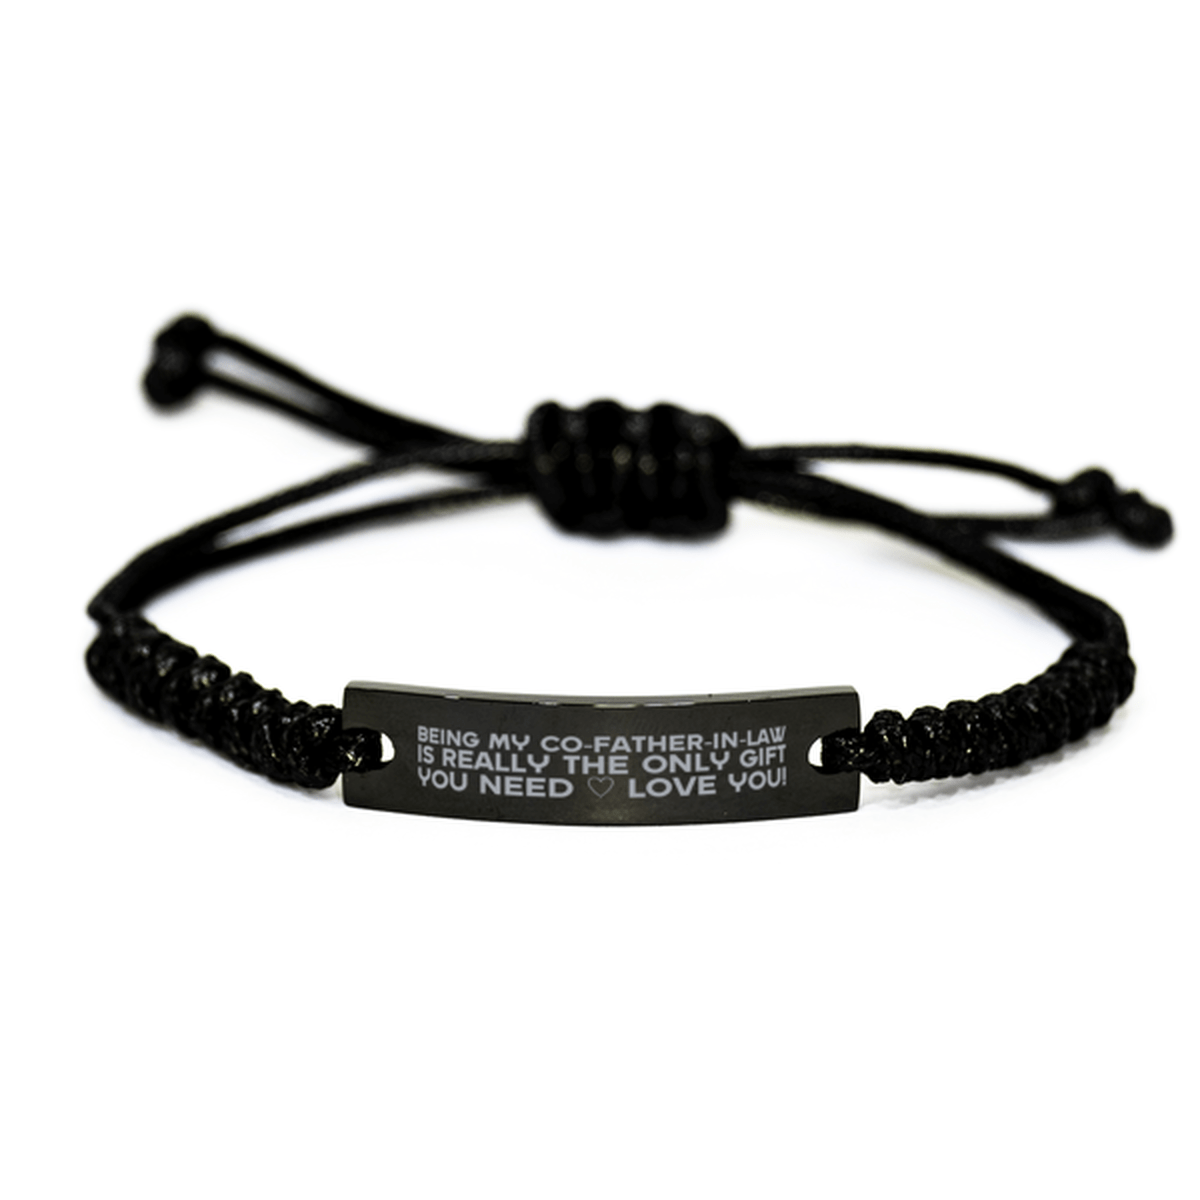 Funny Co-father-in-law Engraved Rope Bracelet, Being My Co-father-in-law Is Really the Only Gift You Need, Best Birthday Gifts for Co-father-in-law